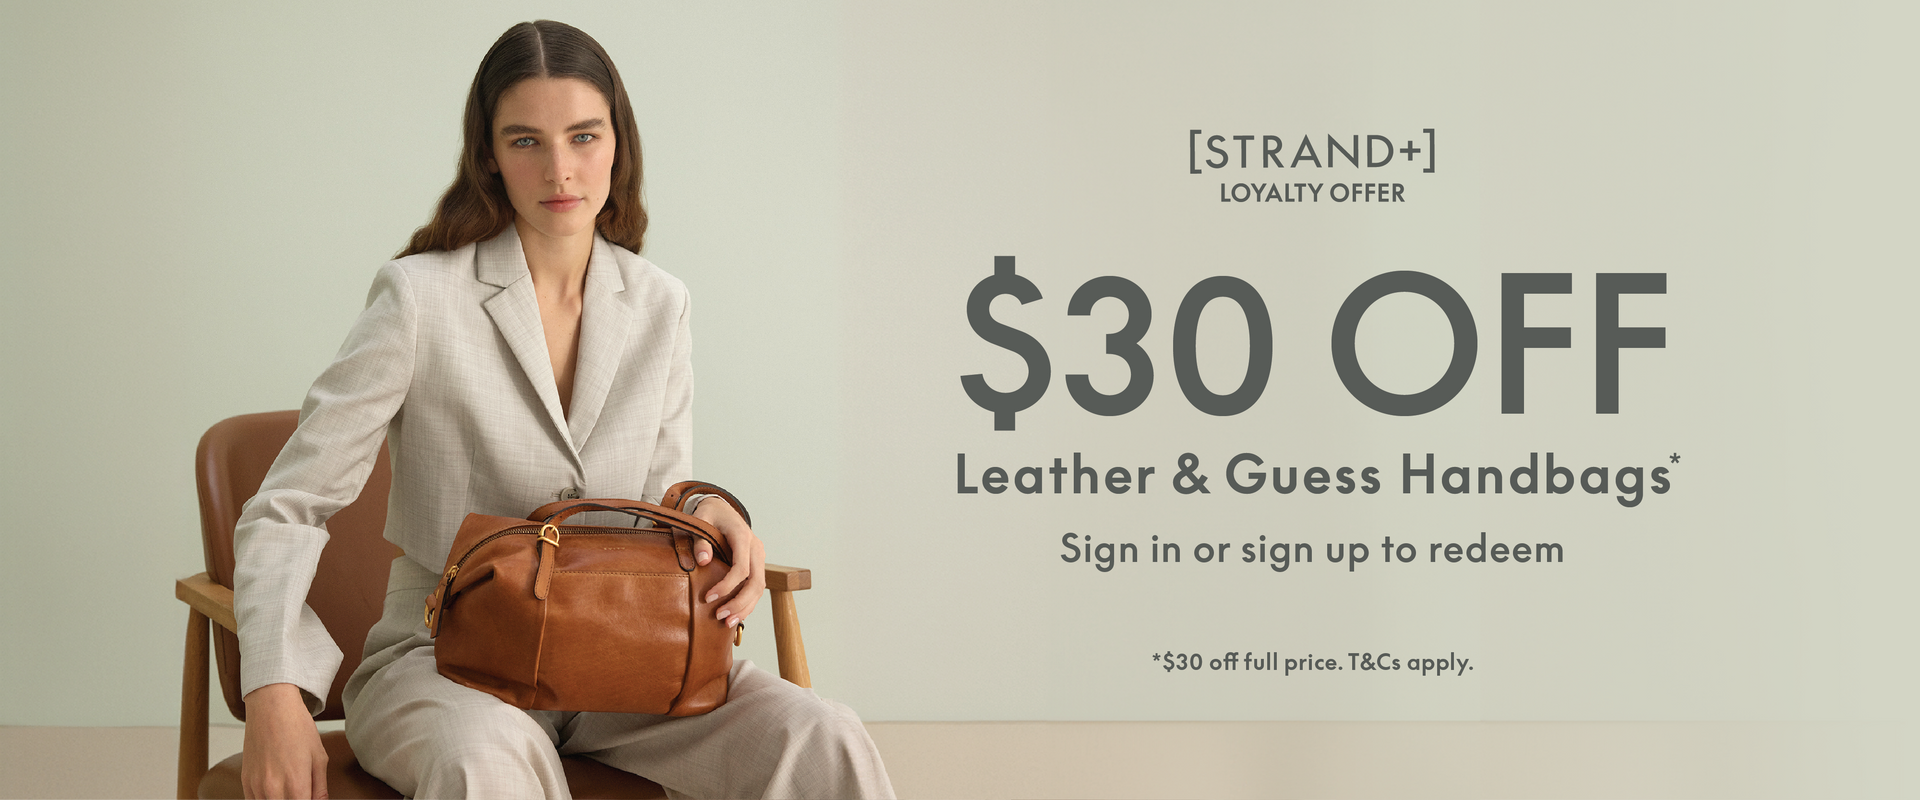 $30 Off Leather & Guess Handbags